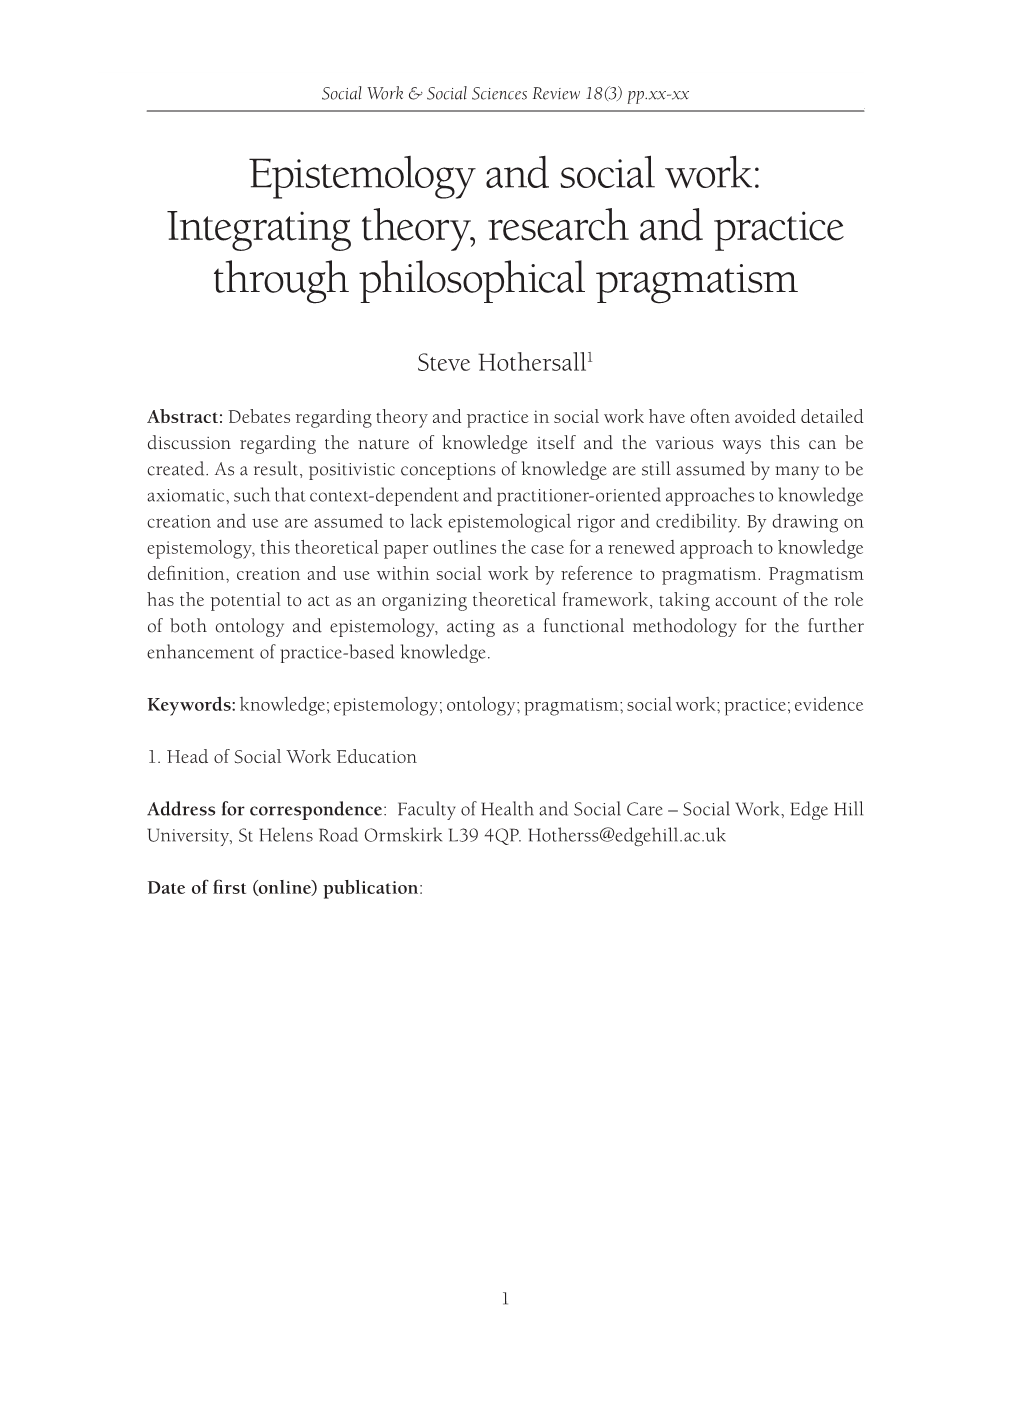 Epistemology and Social Work: Integrating Theory, Research and Practice Through Philosophical Pragmatism